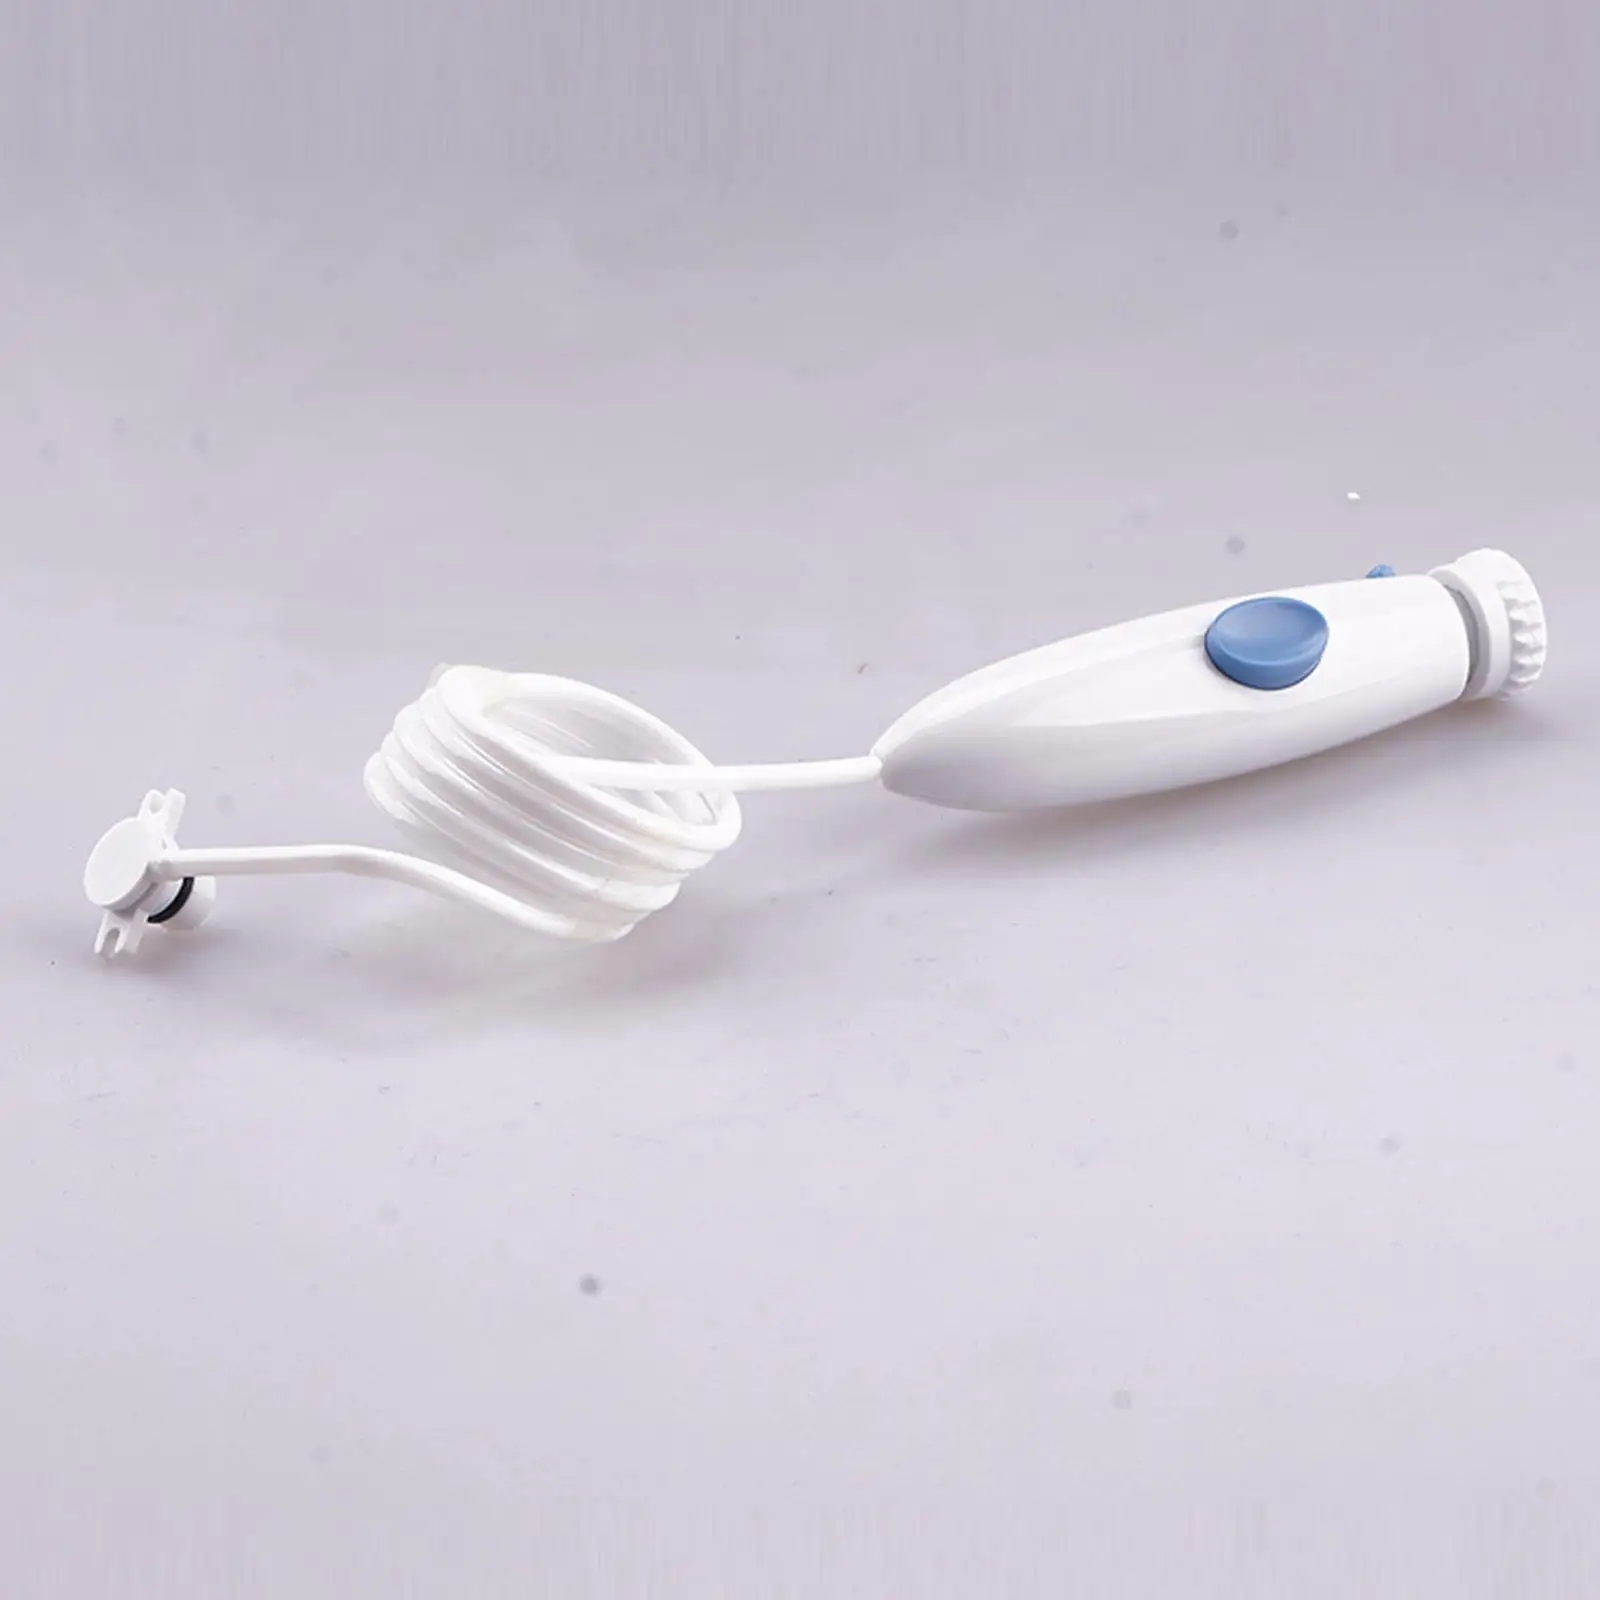 Water Flosser Handle Hose Oral Hygiene Accessories Water Hose Replacement Kit for WP-100 WP-662 WP-670 WP-100EC WP-112